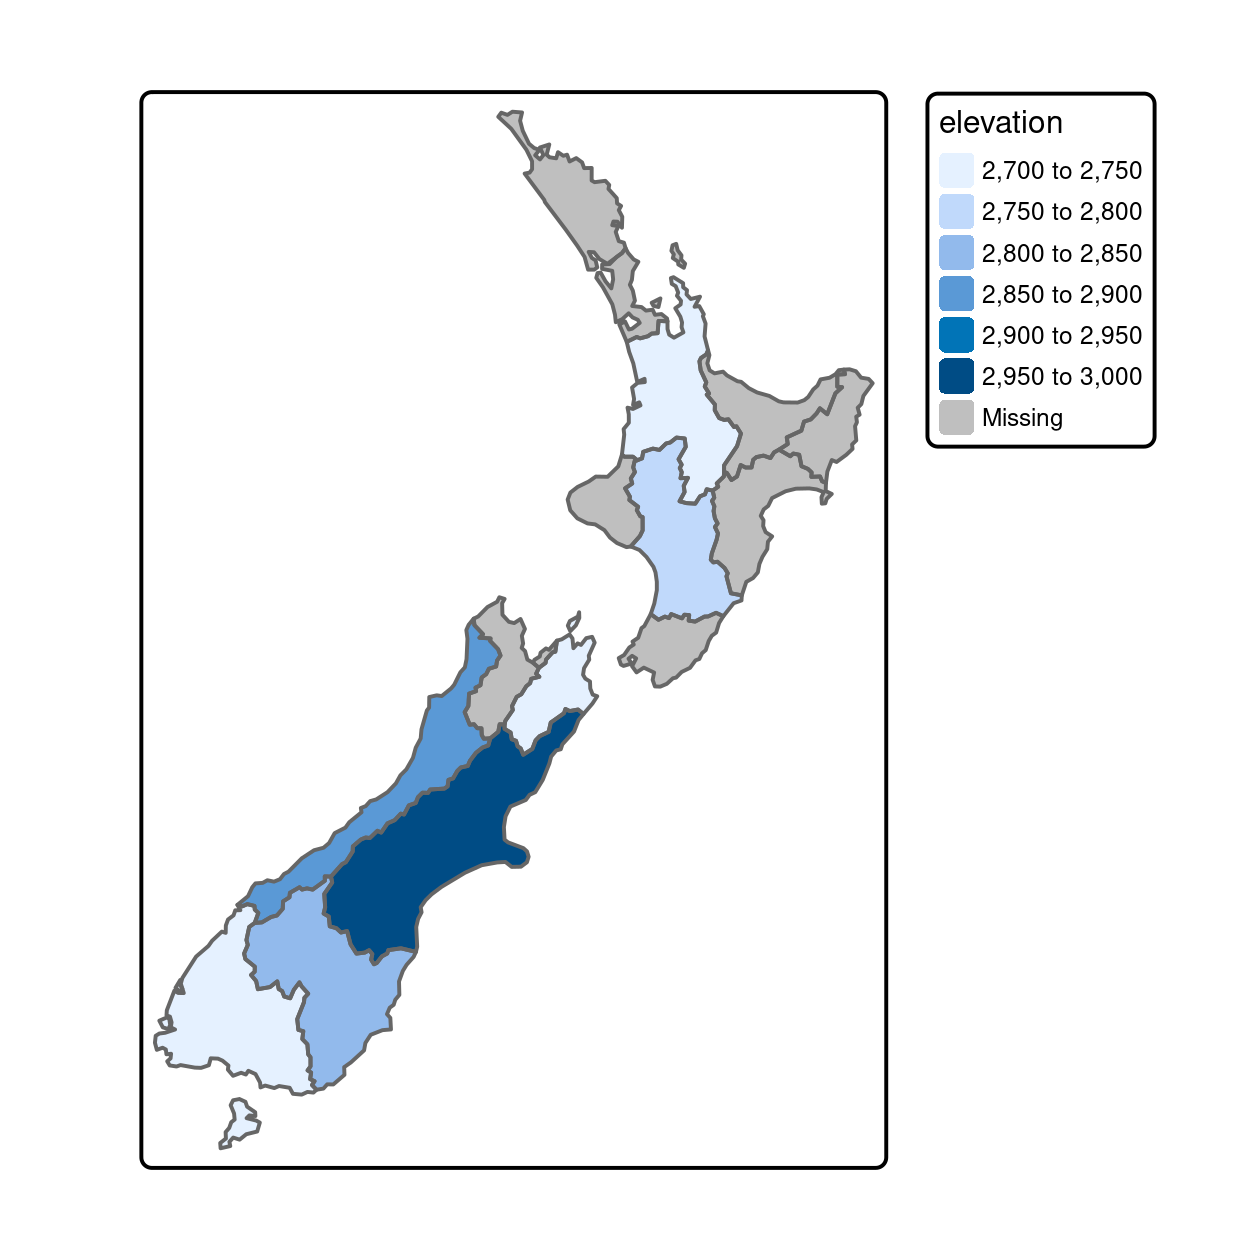 Average height of the top 101 high points across the regions of New Zealand.